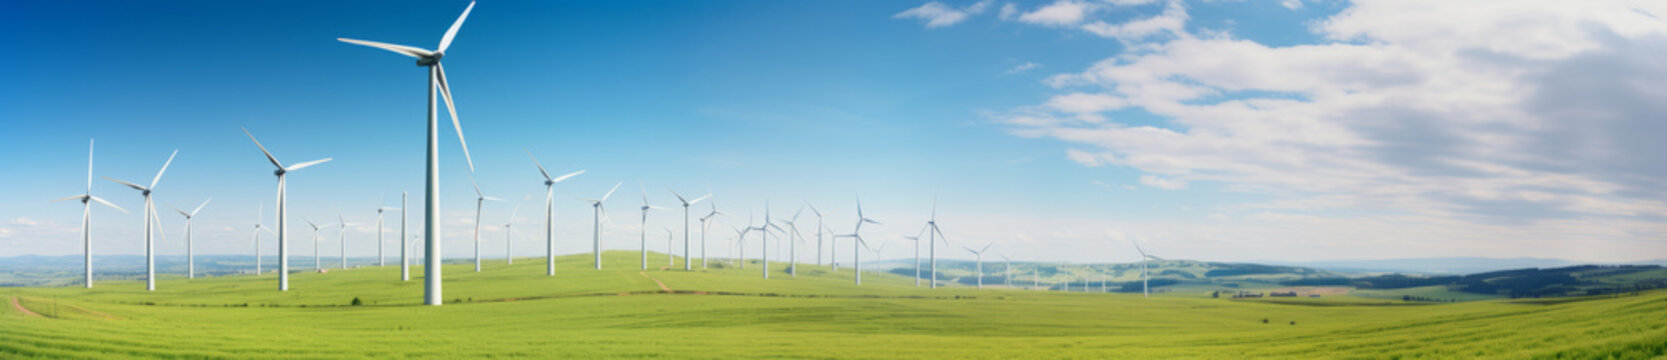 field with windmills panorama